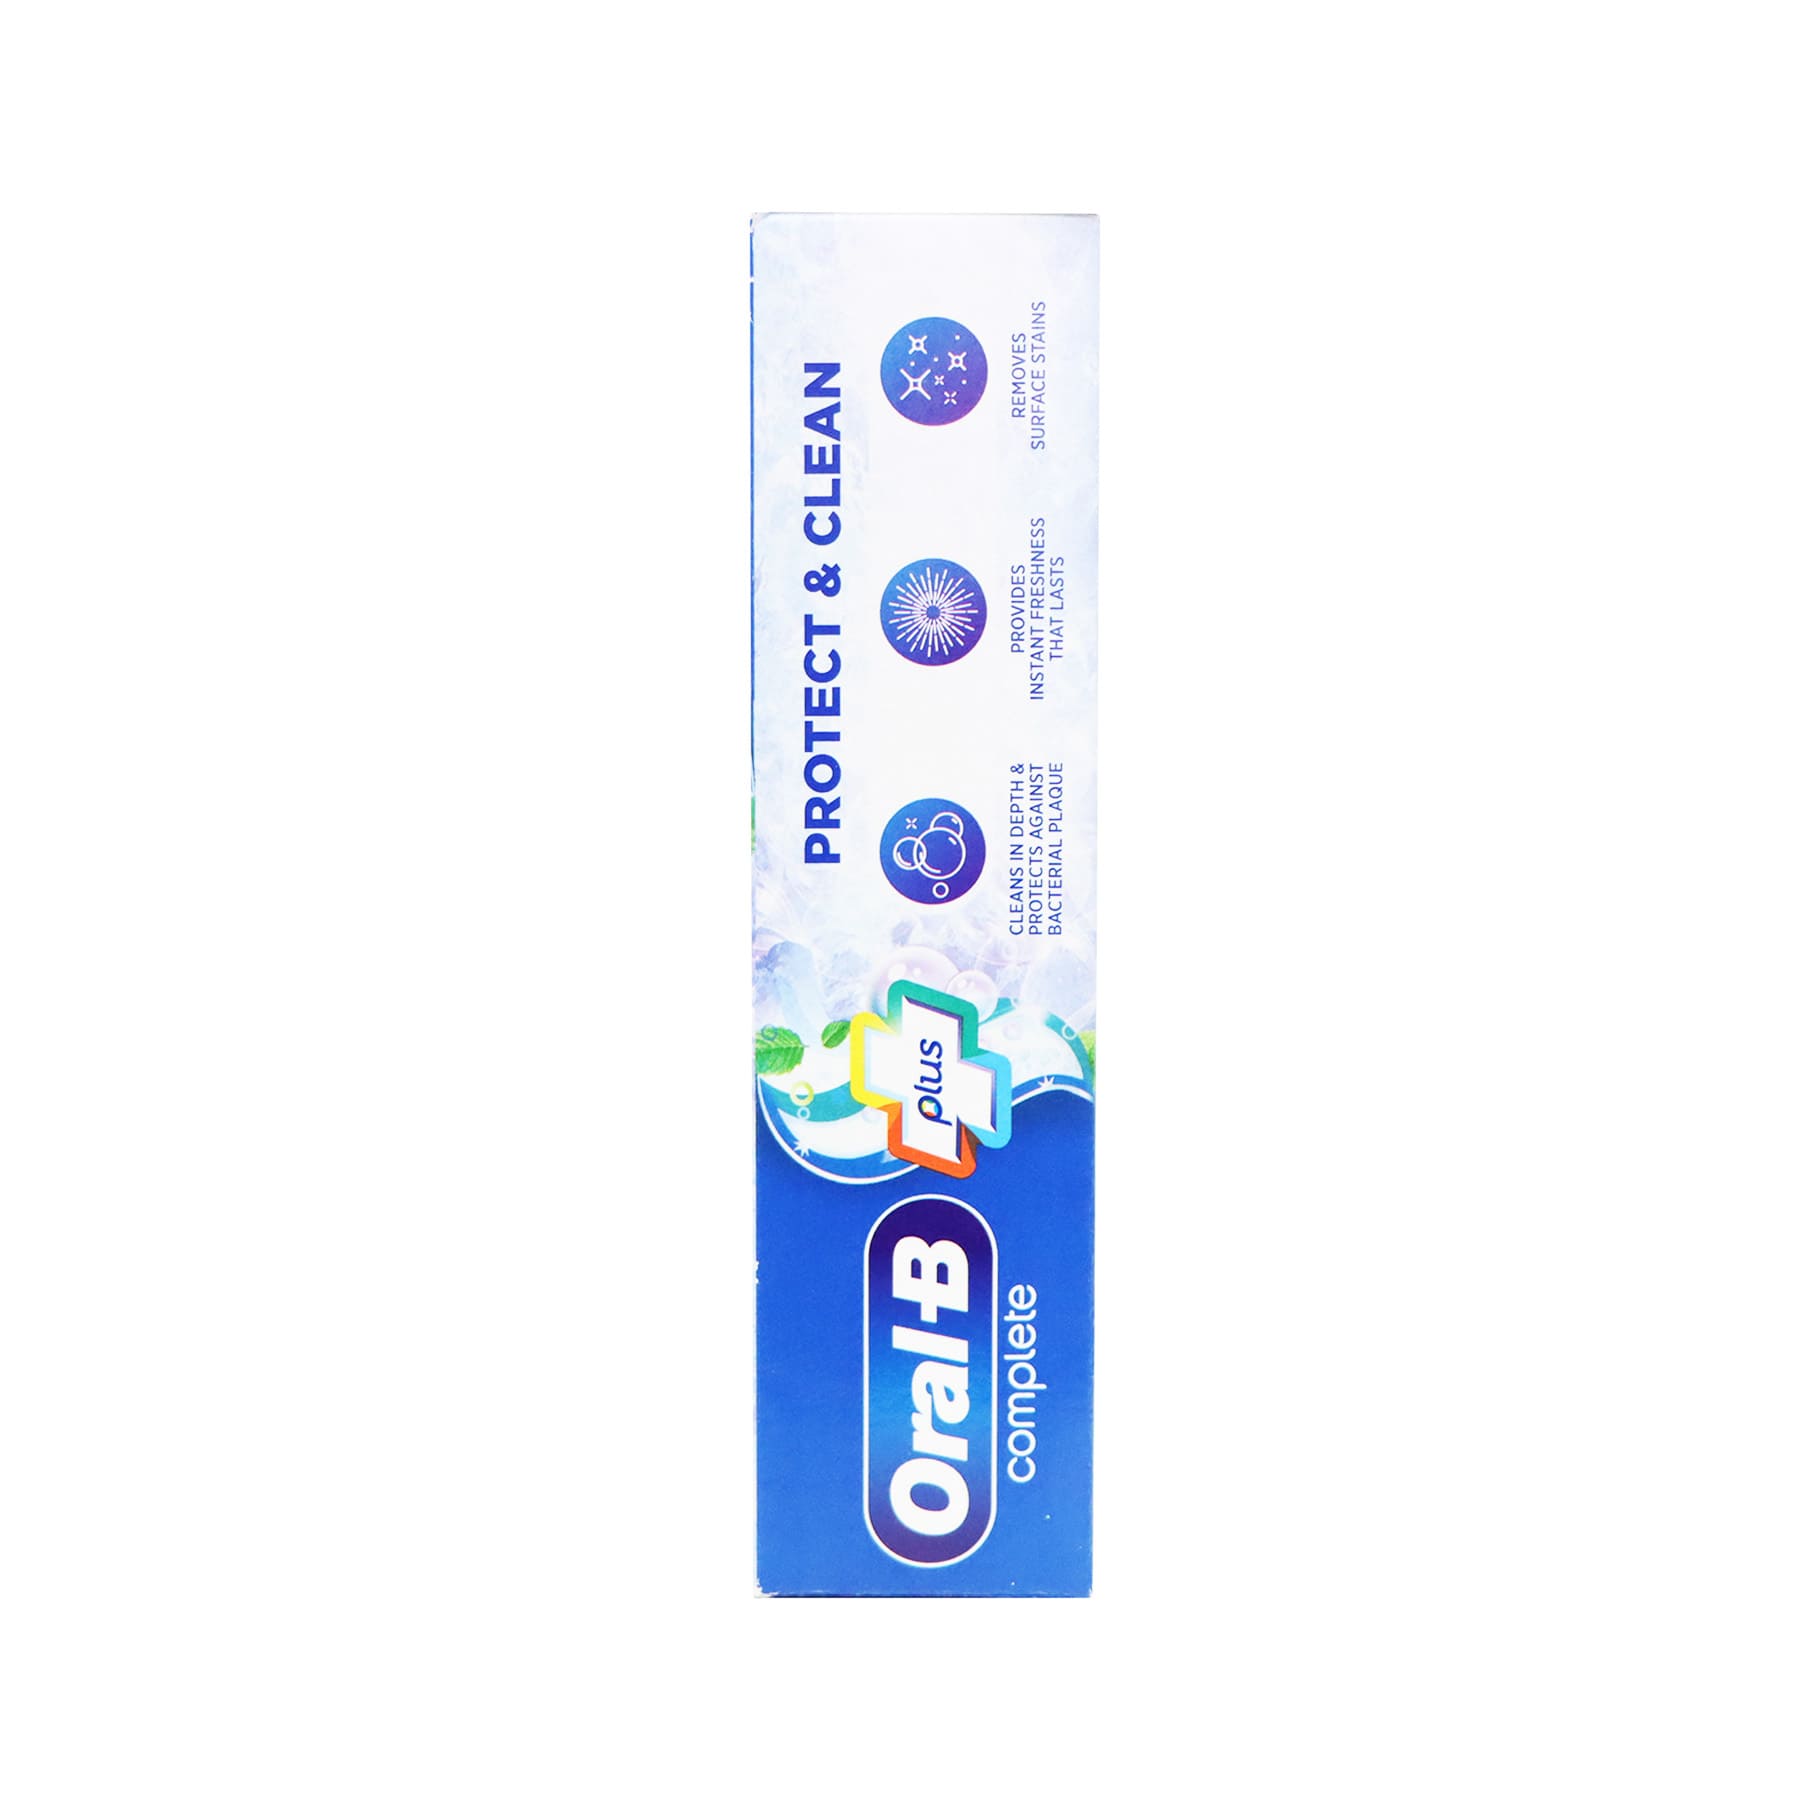 Oral-B Complete Plus Protect & Clean Toothpaste 75ml